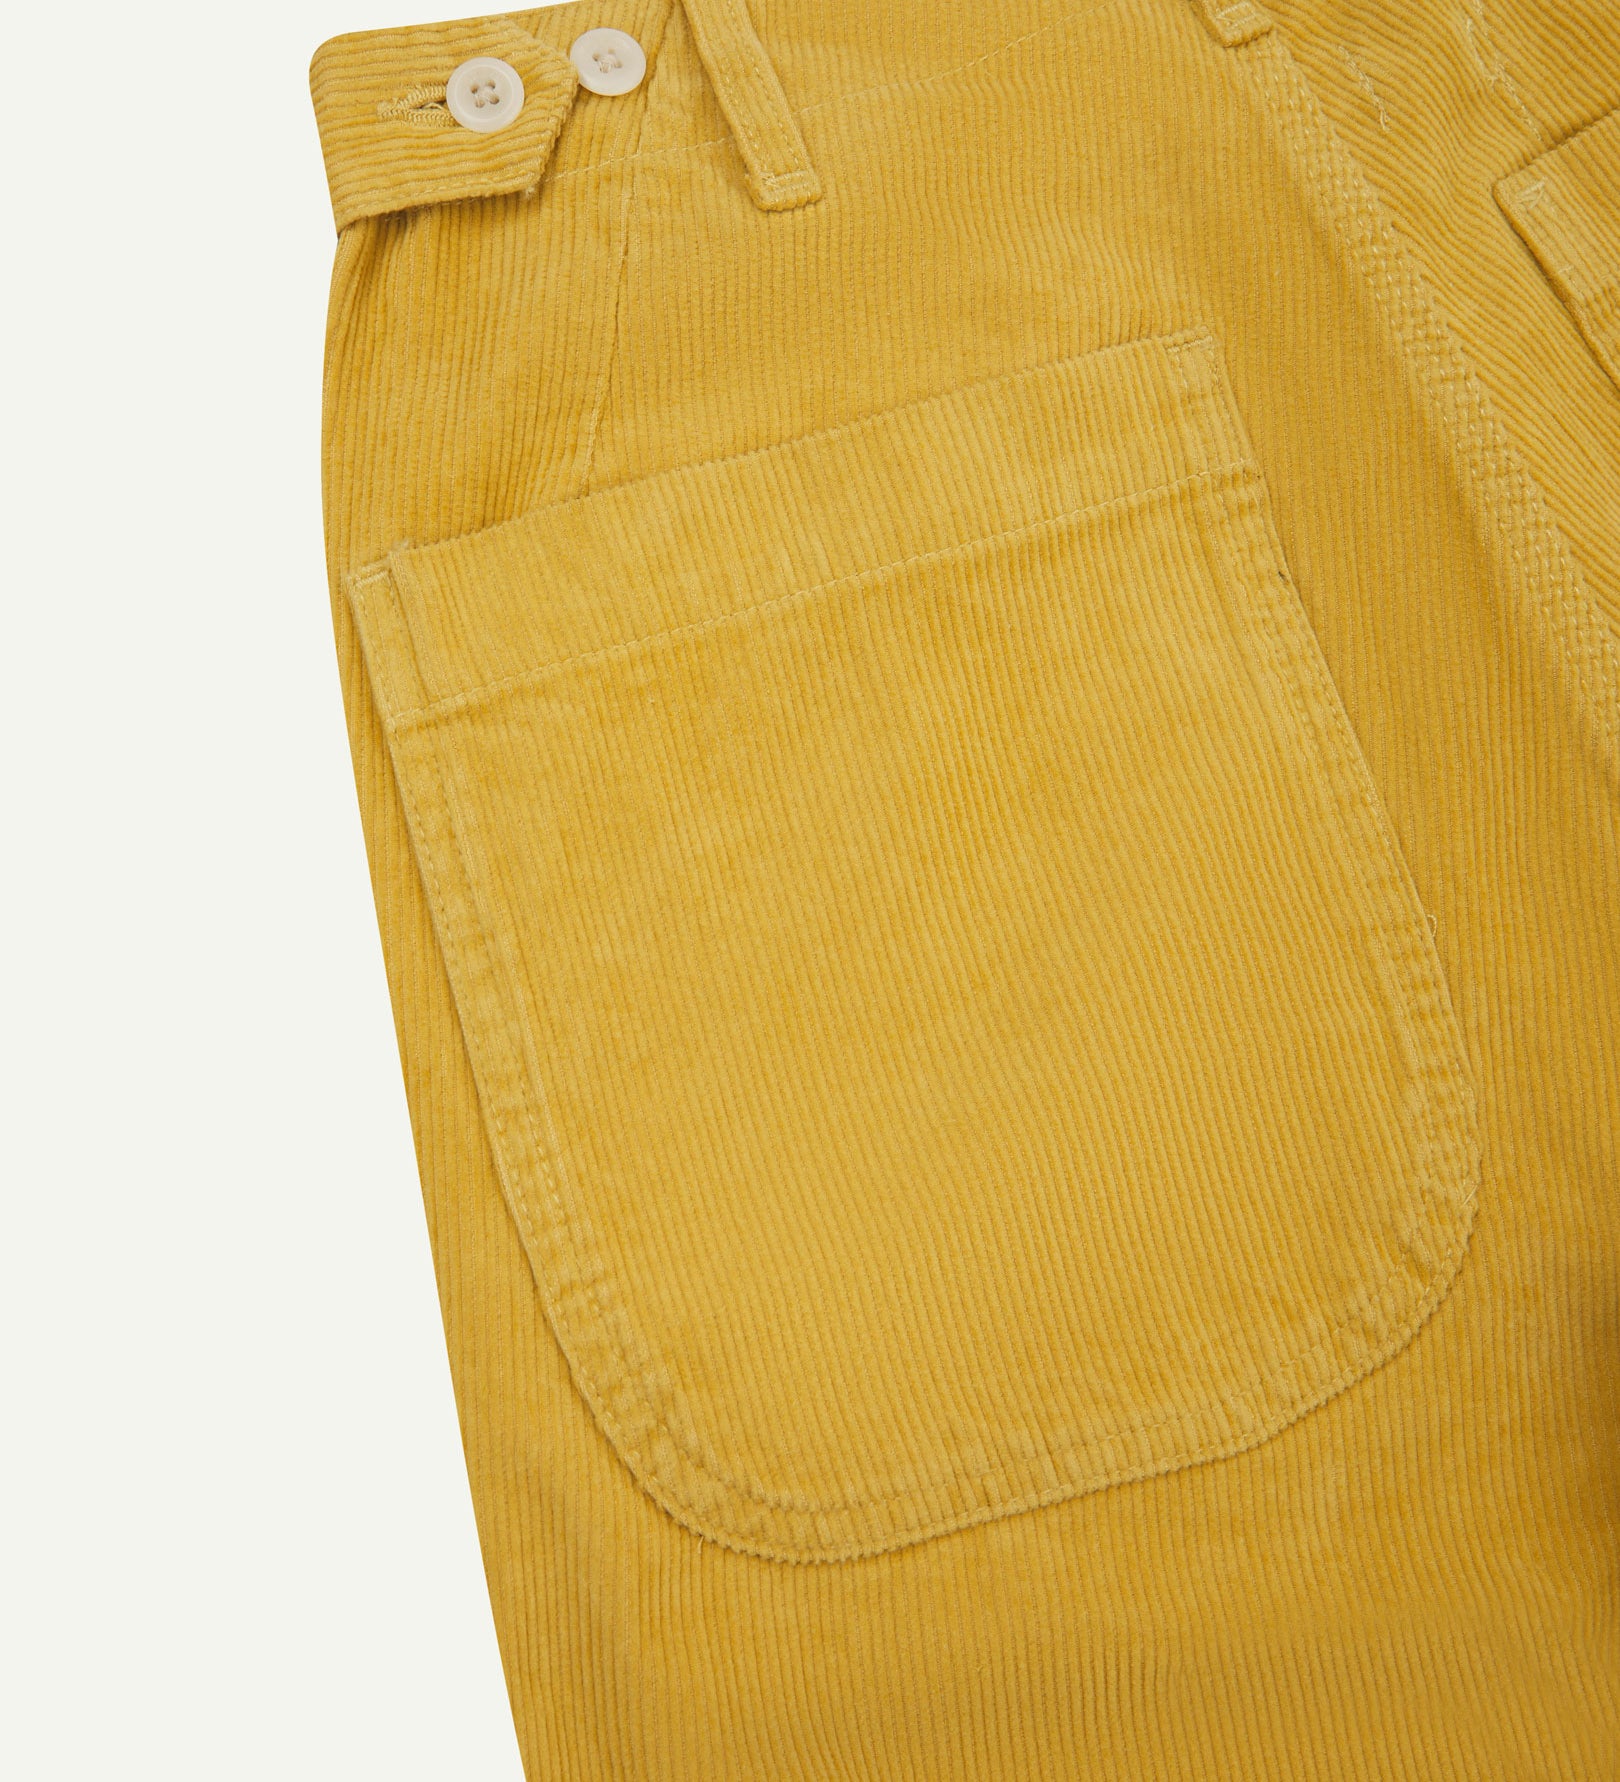 Close up back view of Uskees 5012 corduroy trousers showing back pockets, adjustable waistband and corozo buttons.